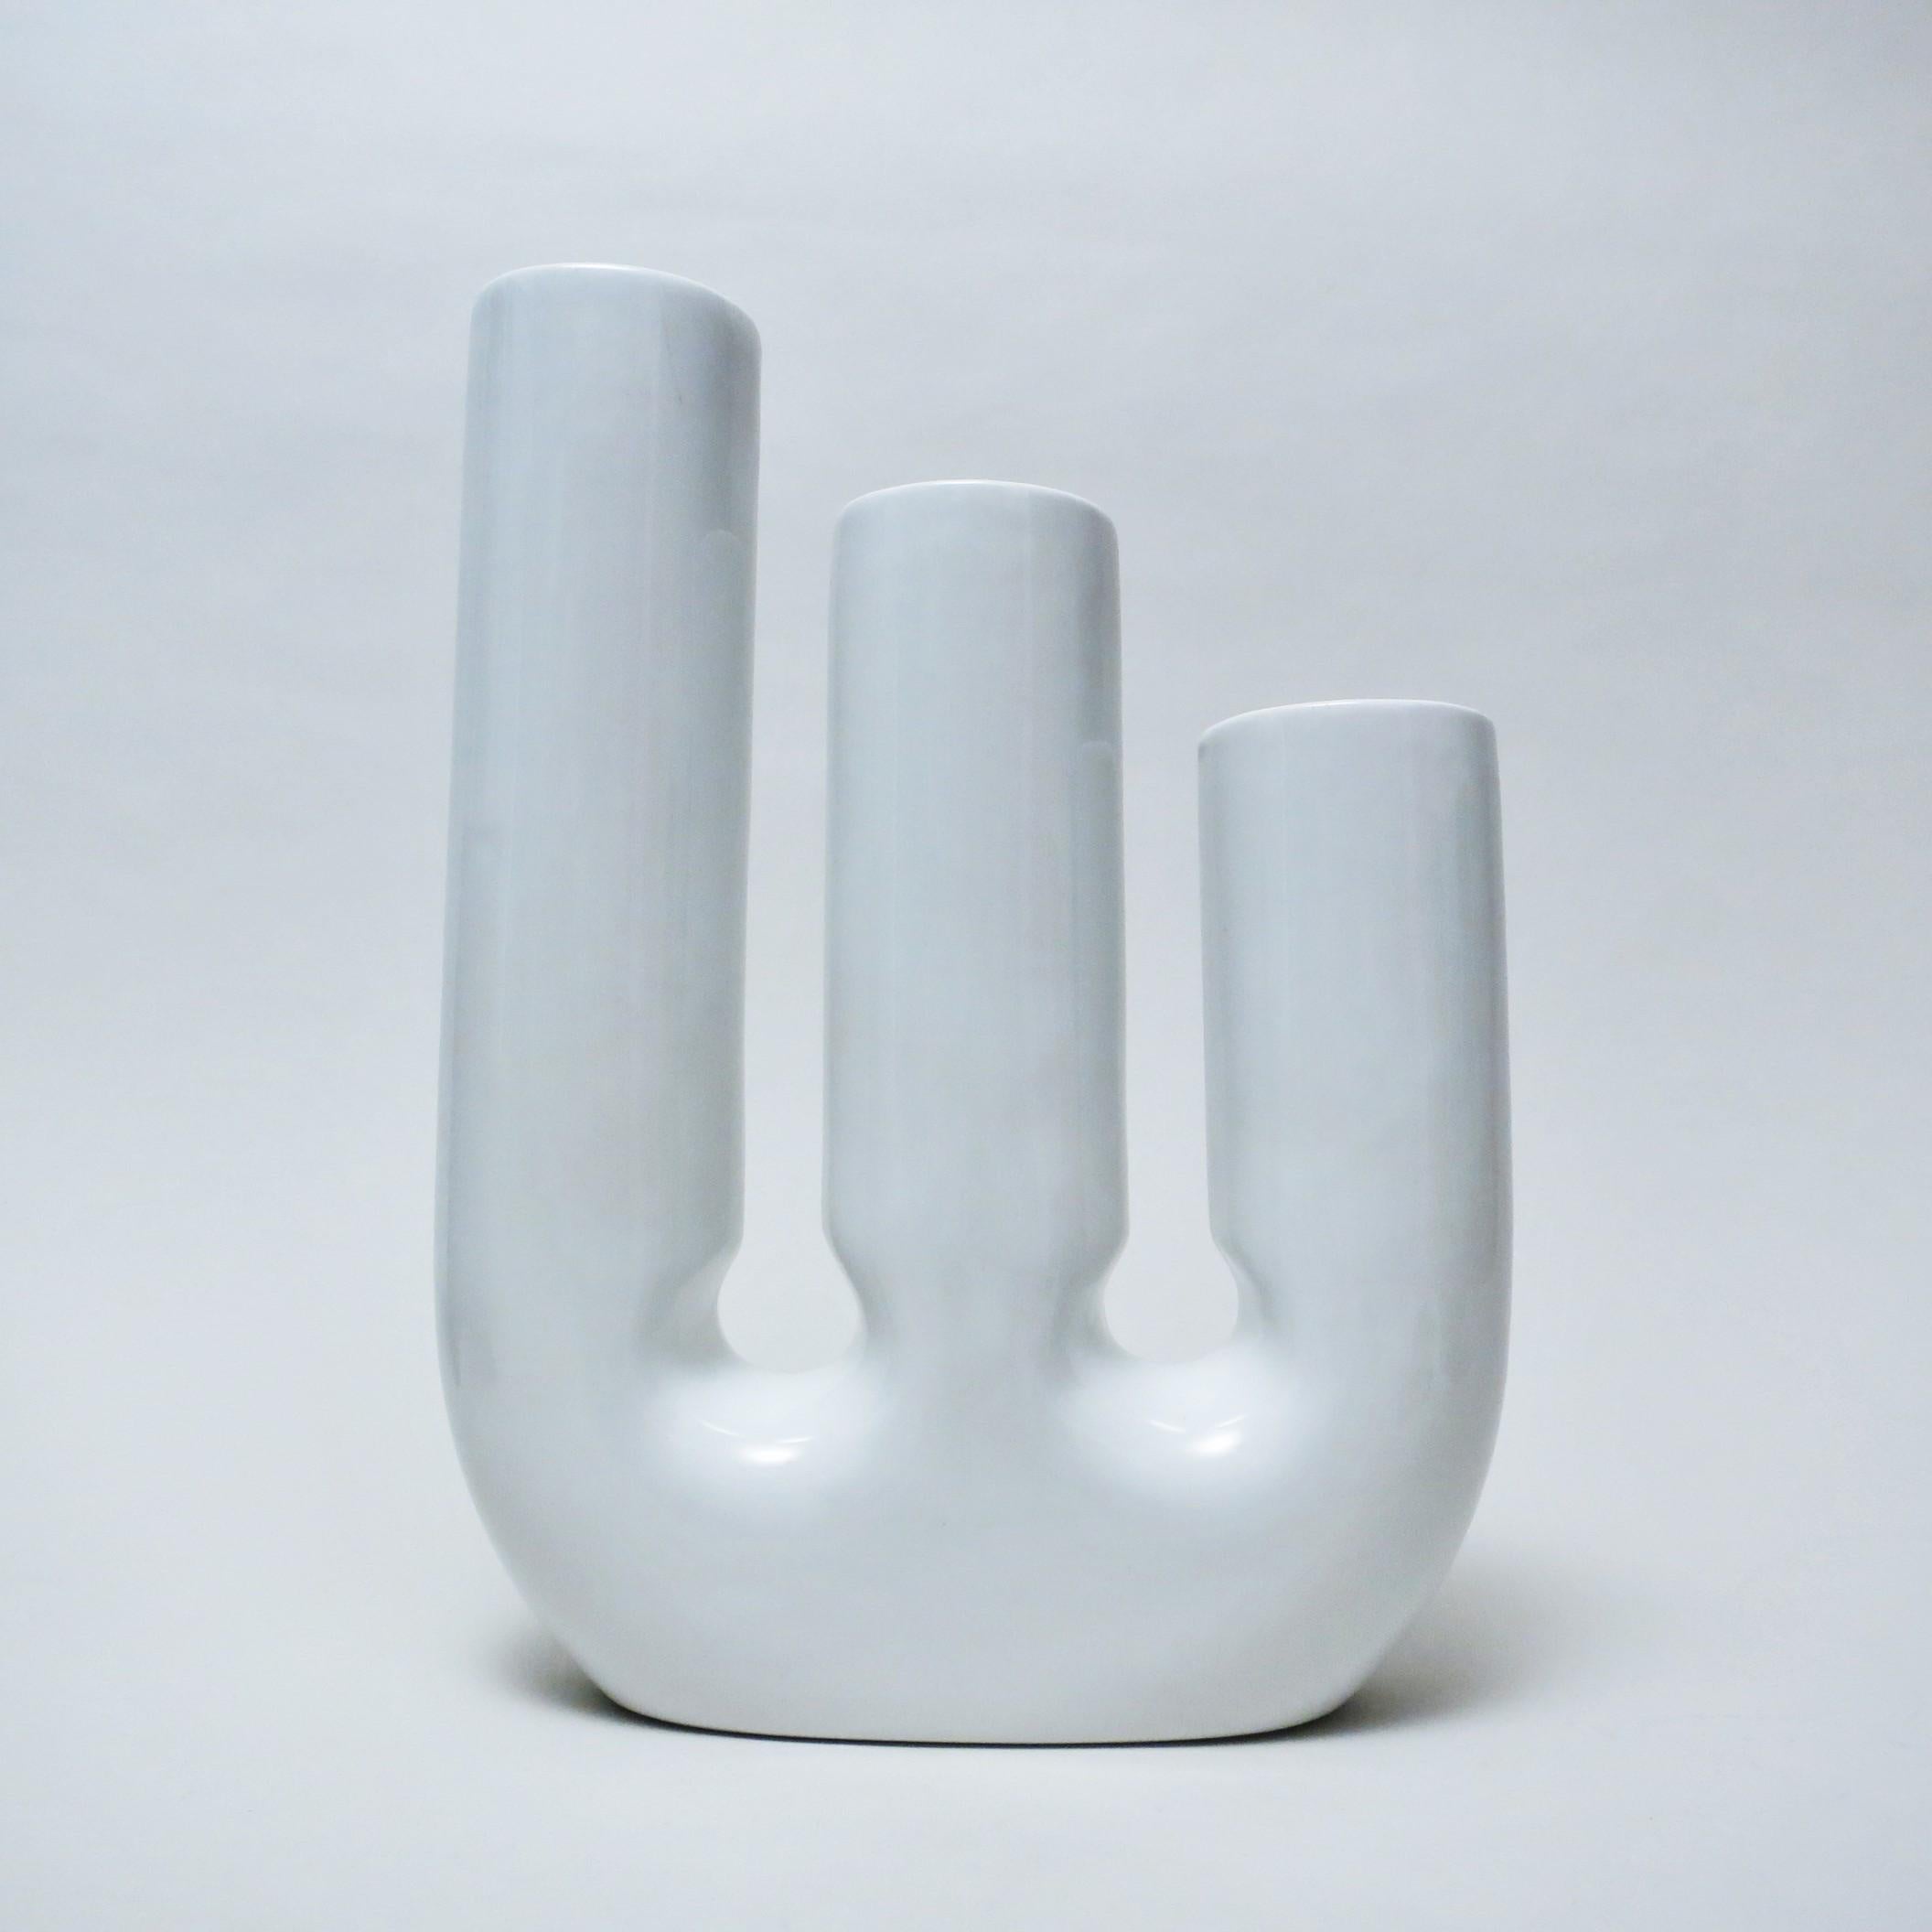 Italian white ceramic vase with 3 chimney designed by Pino Spagnolo for Sicart in the early 1970s.